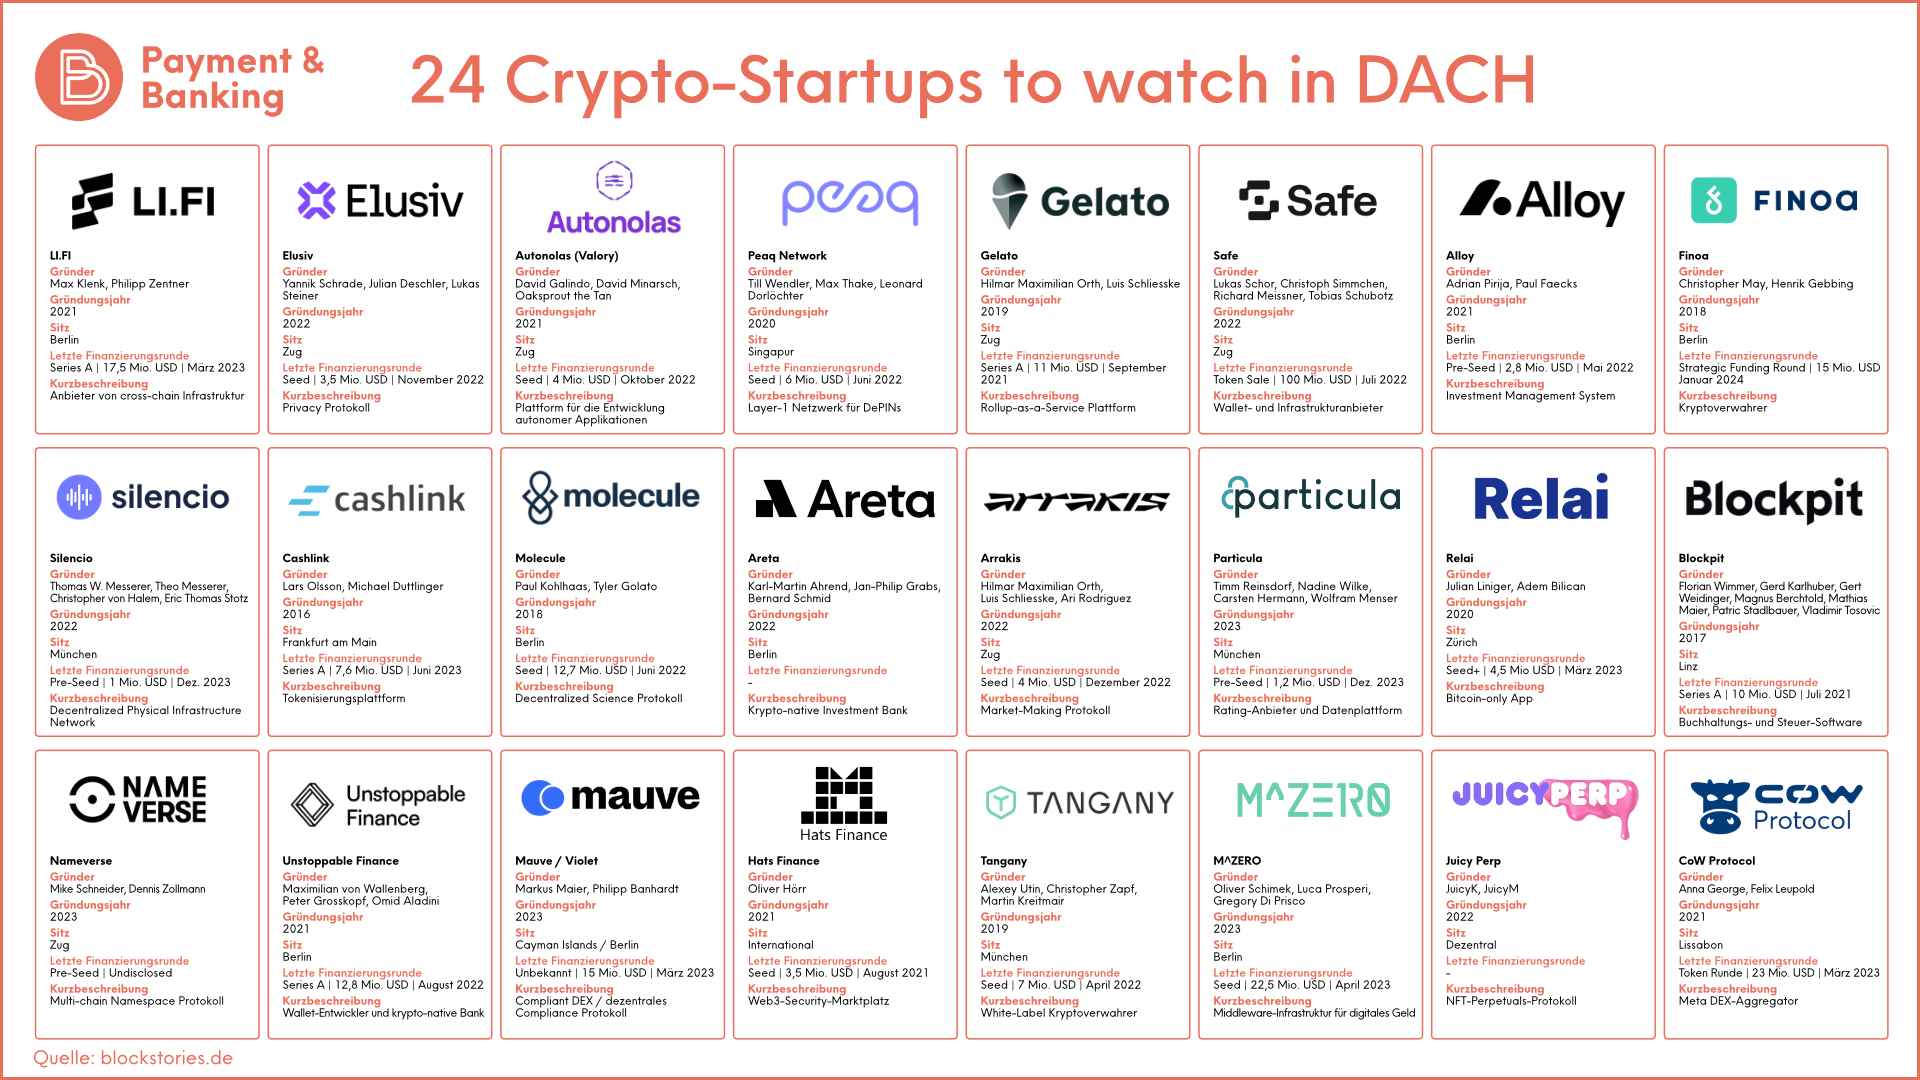 24 Crypto-Startups to watch in DACH